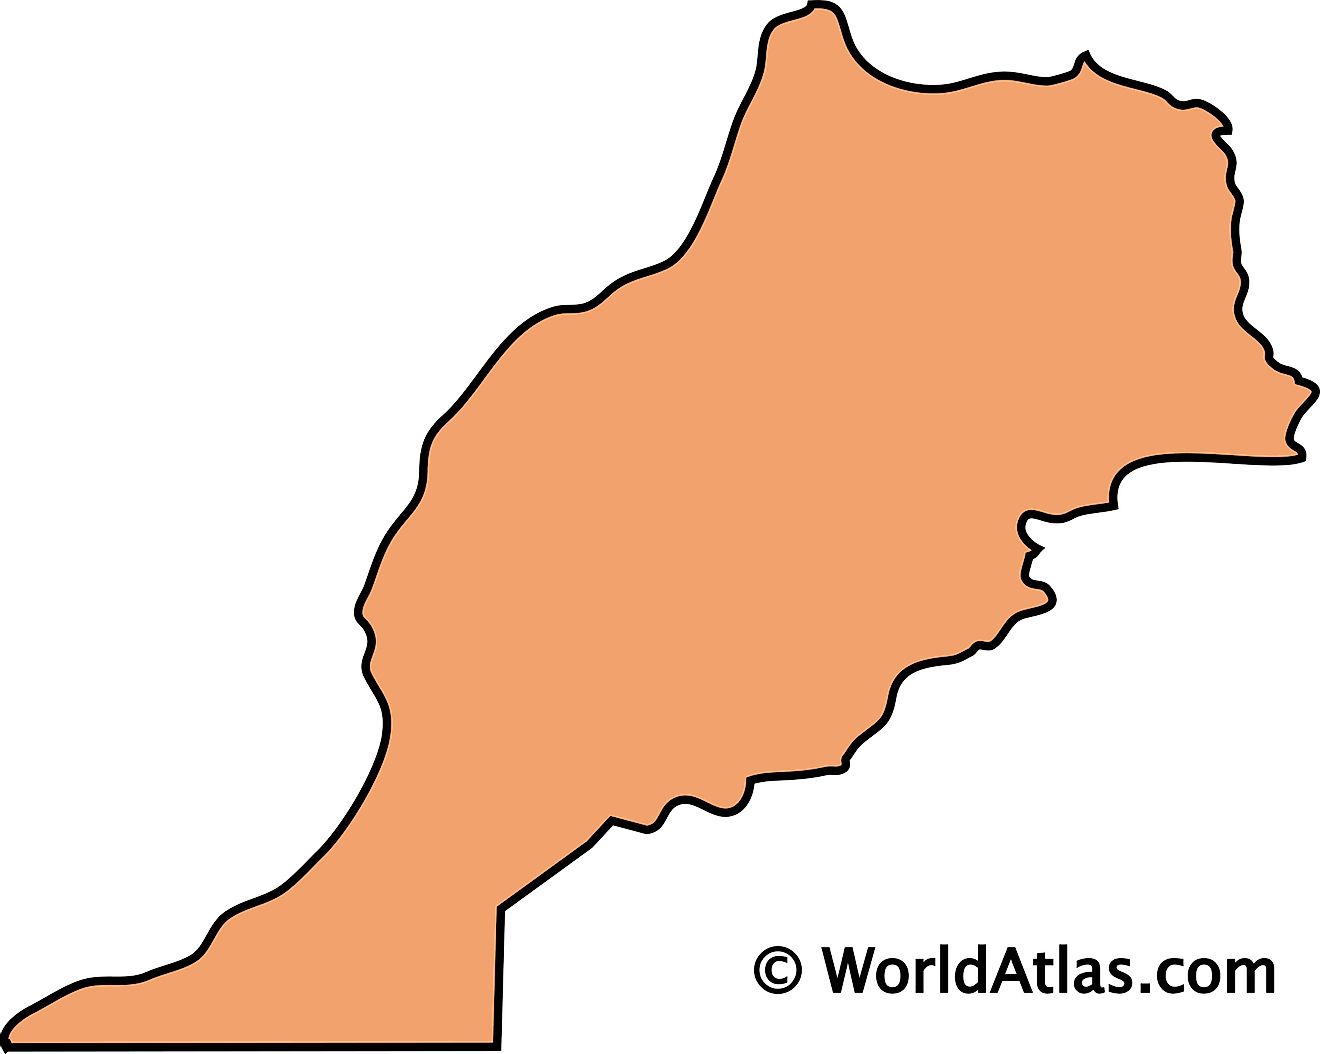 Outline Map of Morocco